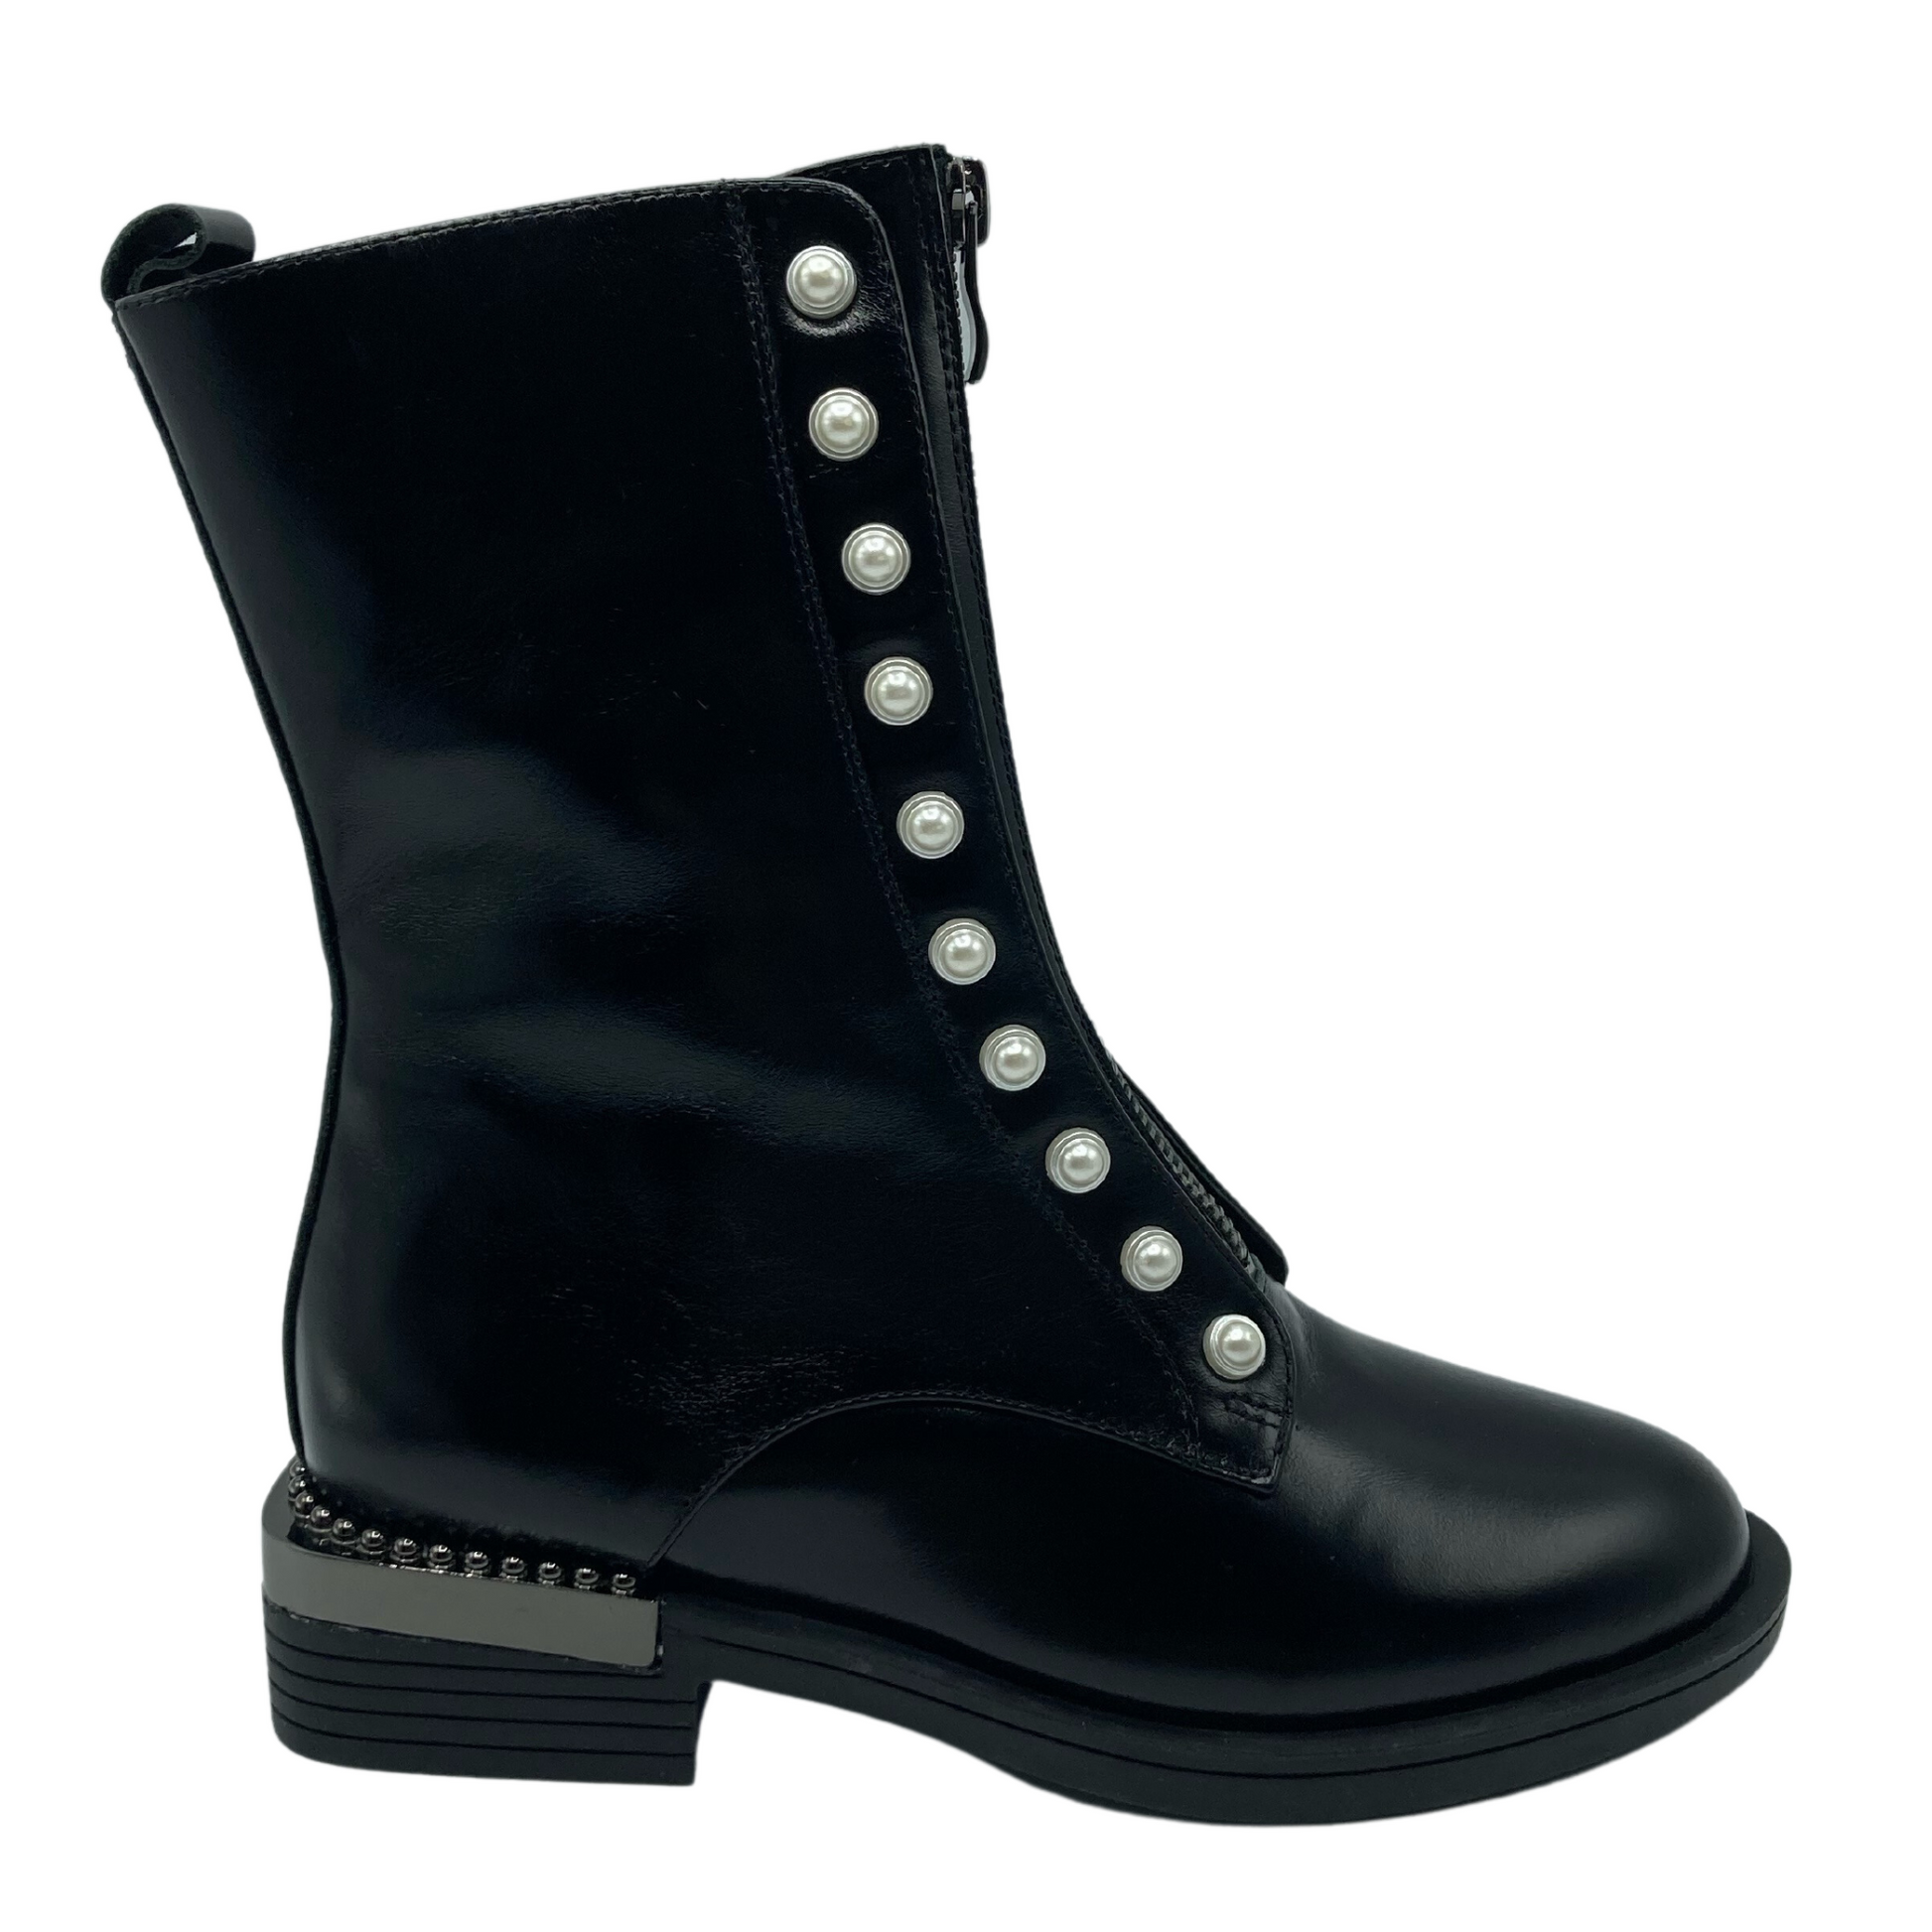 Right facing view of black leather boot with black rubber outsole, block heel and pearls along the front zipper